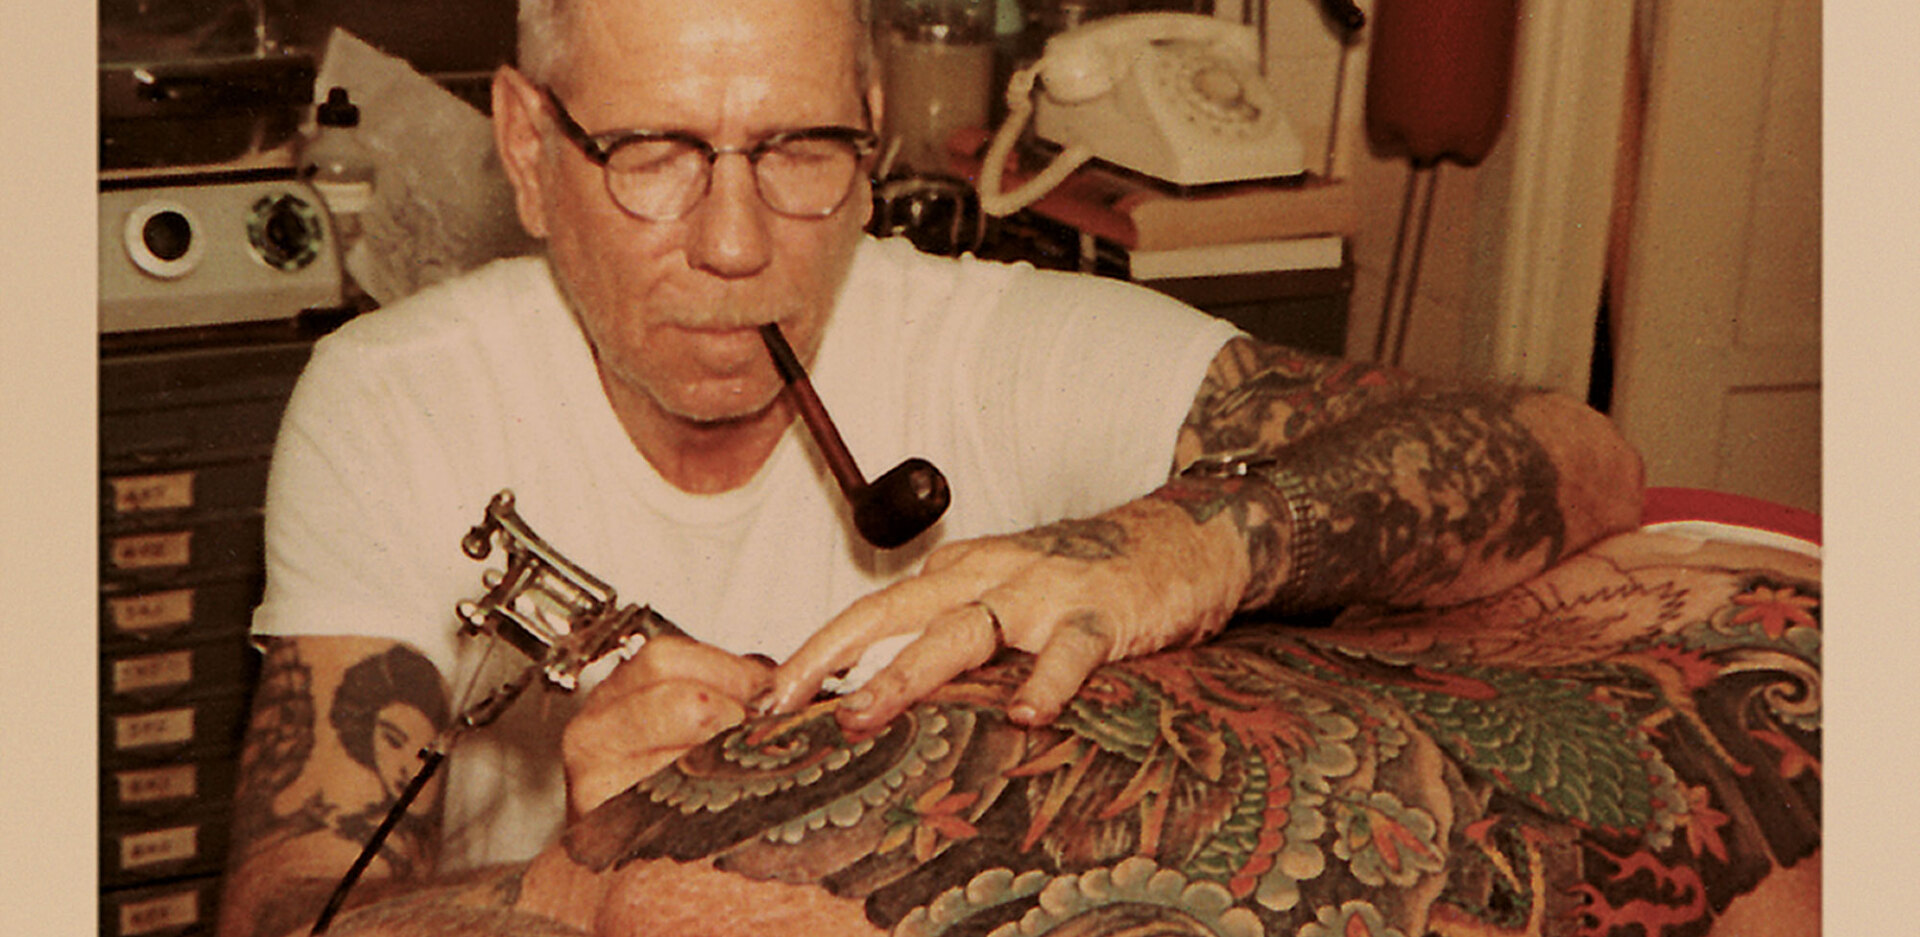 Norman Collins tattooing back with pipe in mouth